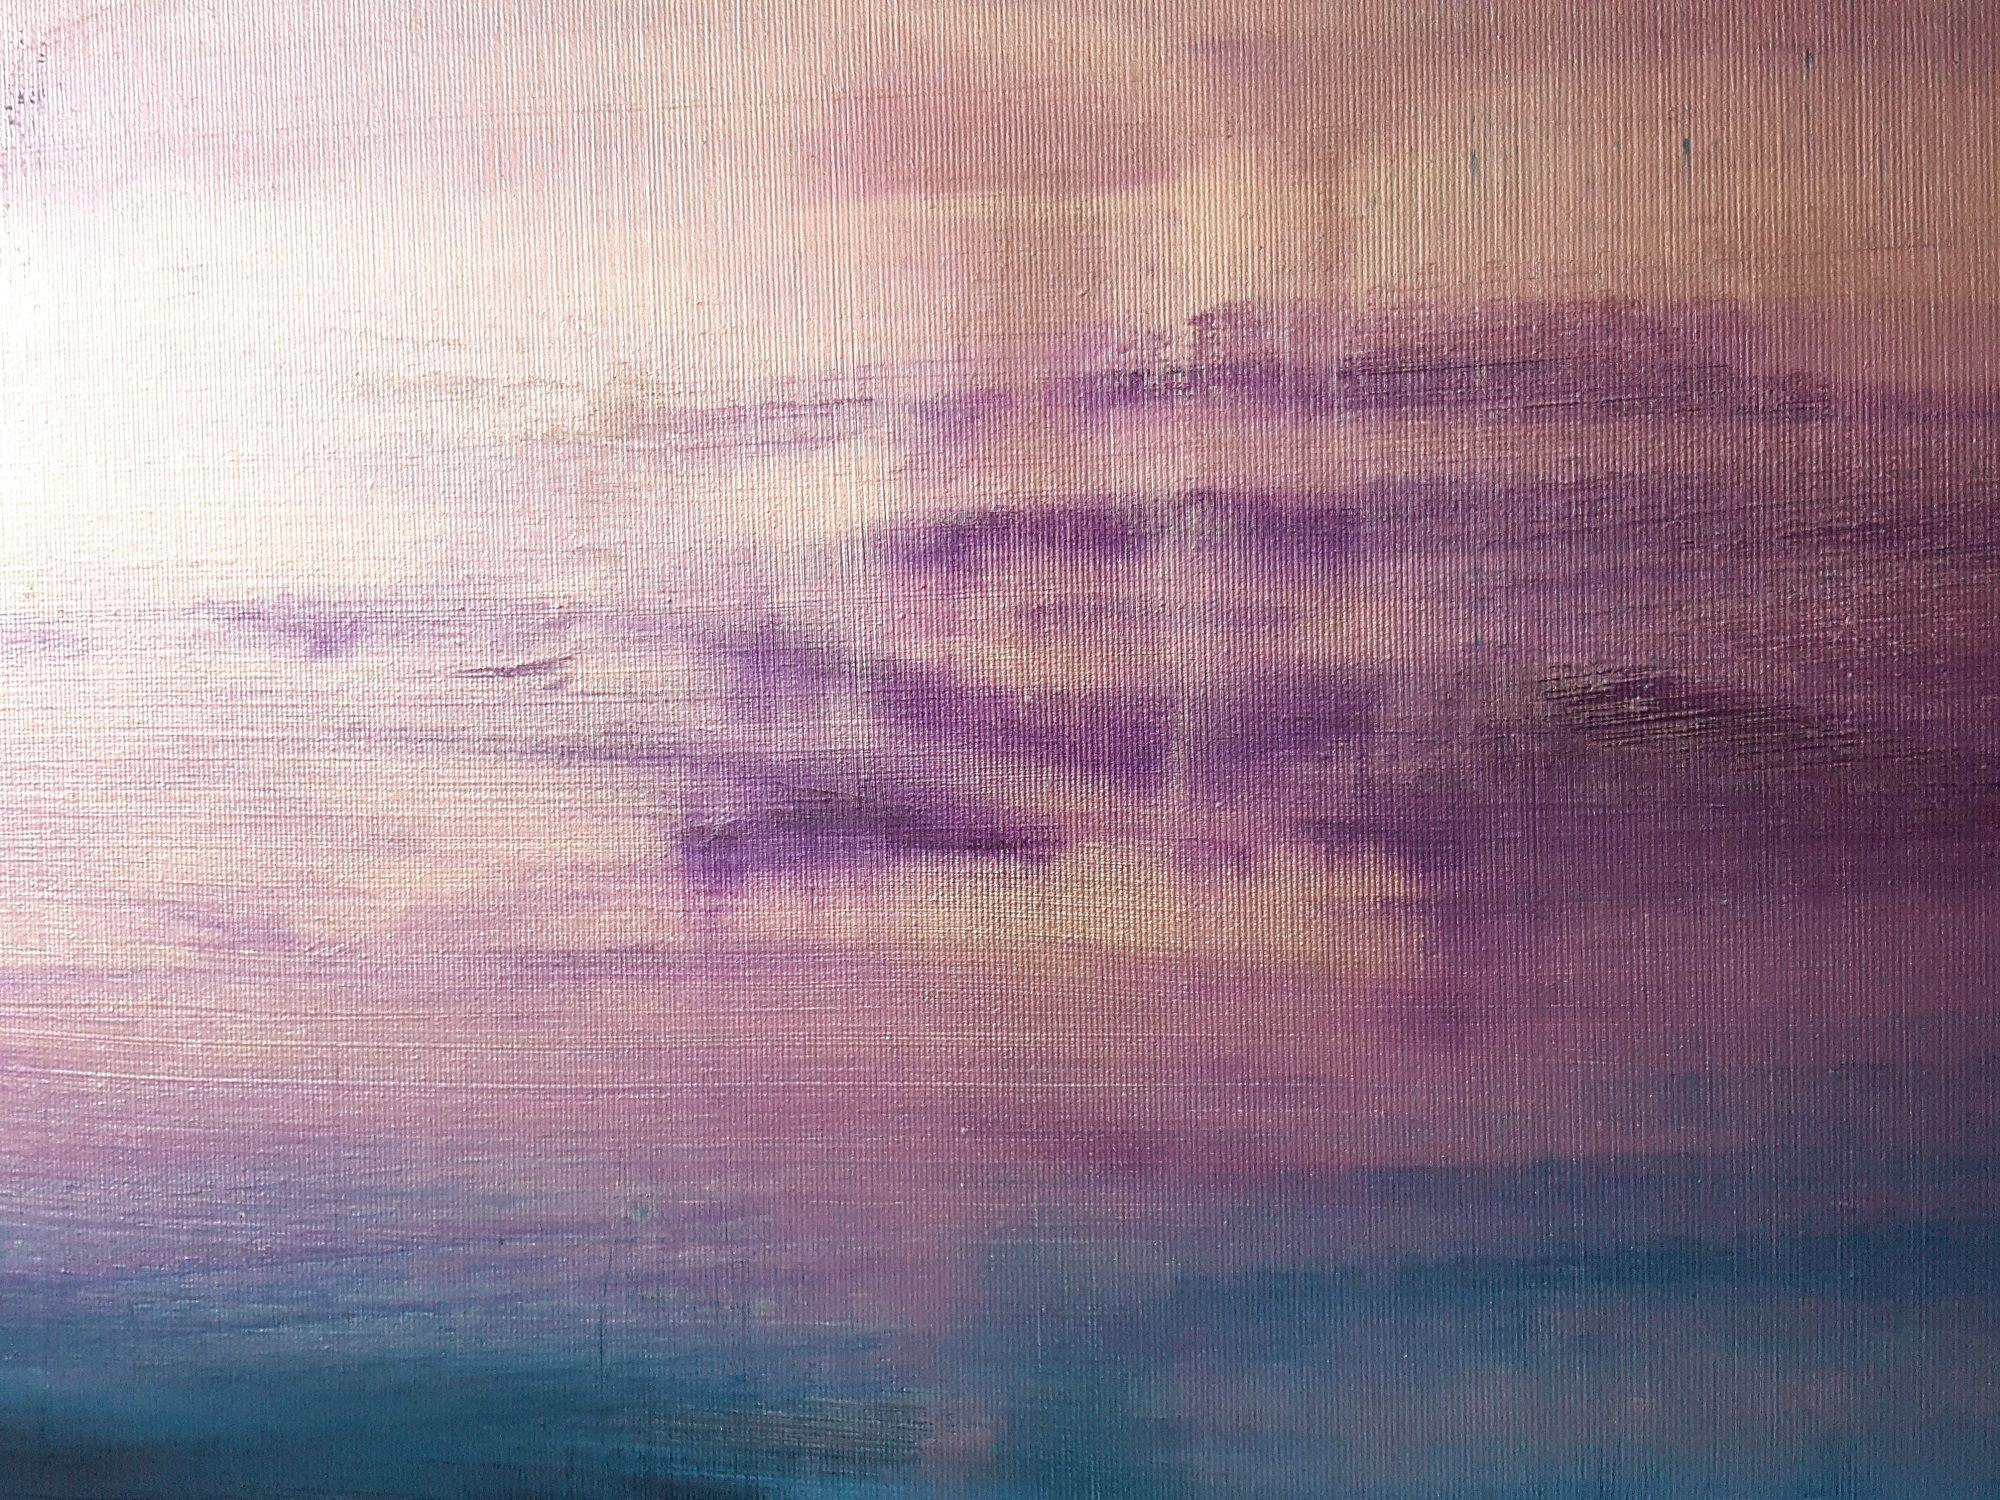 Waiting for the rain - large abstract landscape, Painting, Acrylic on Canvas - Purple Abstract Painting by Ivana Olbricht